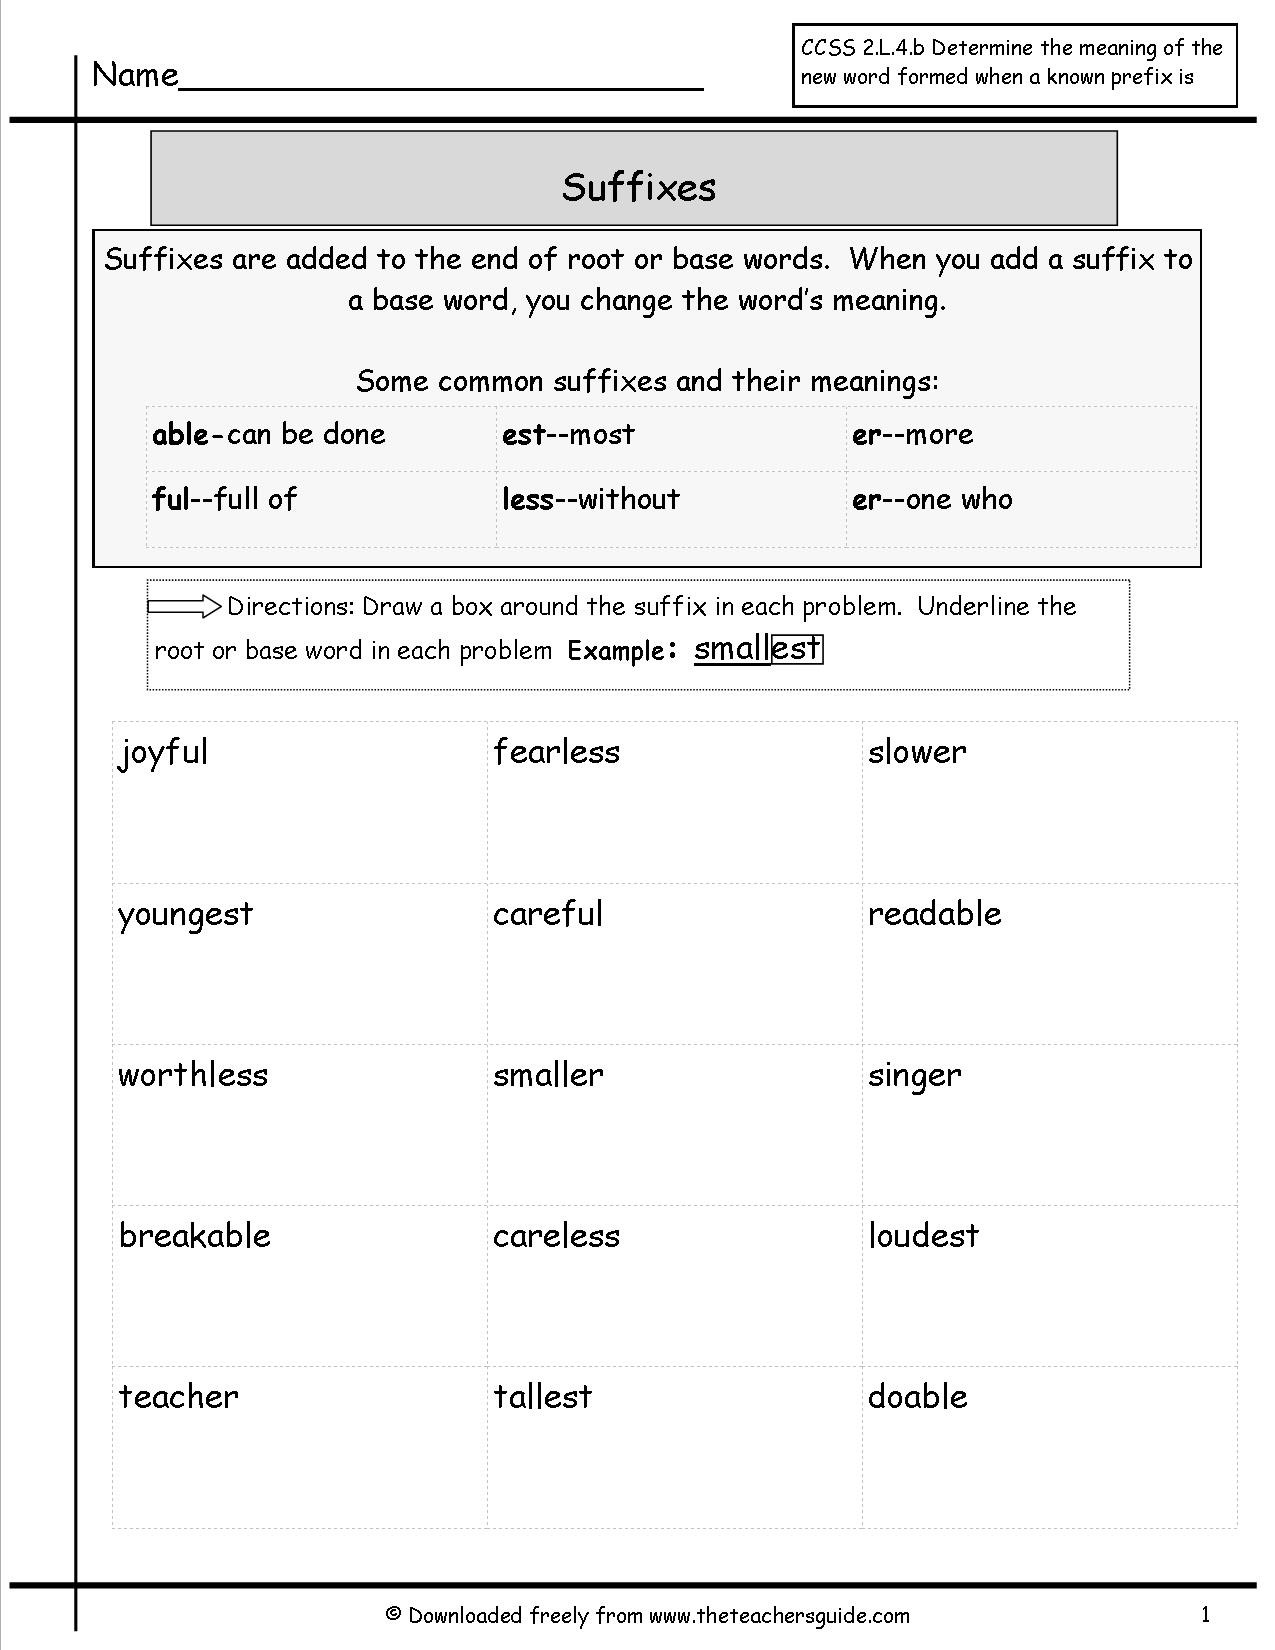 Root Words Worksheets 4th Grade Free Prefixes and Suffixes Worksheets From the Teacher S Guide